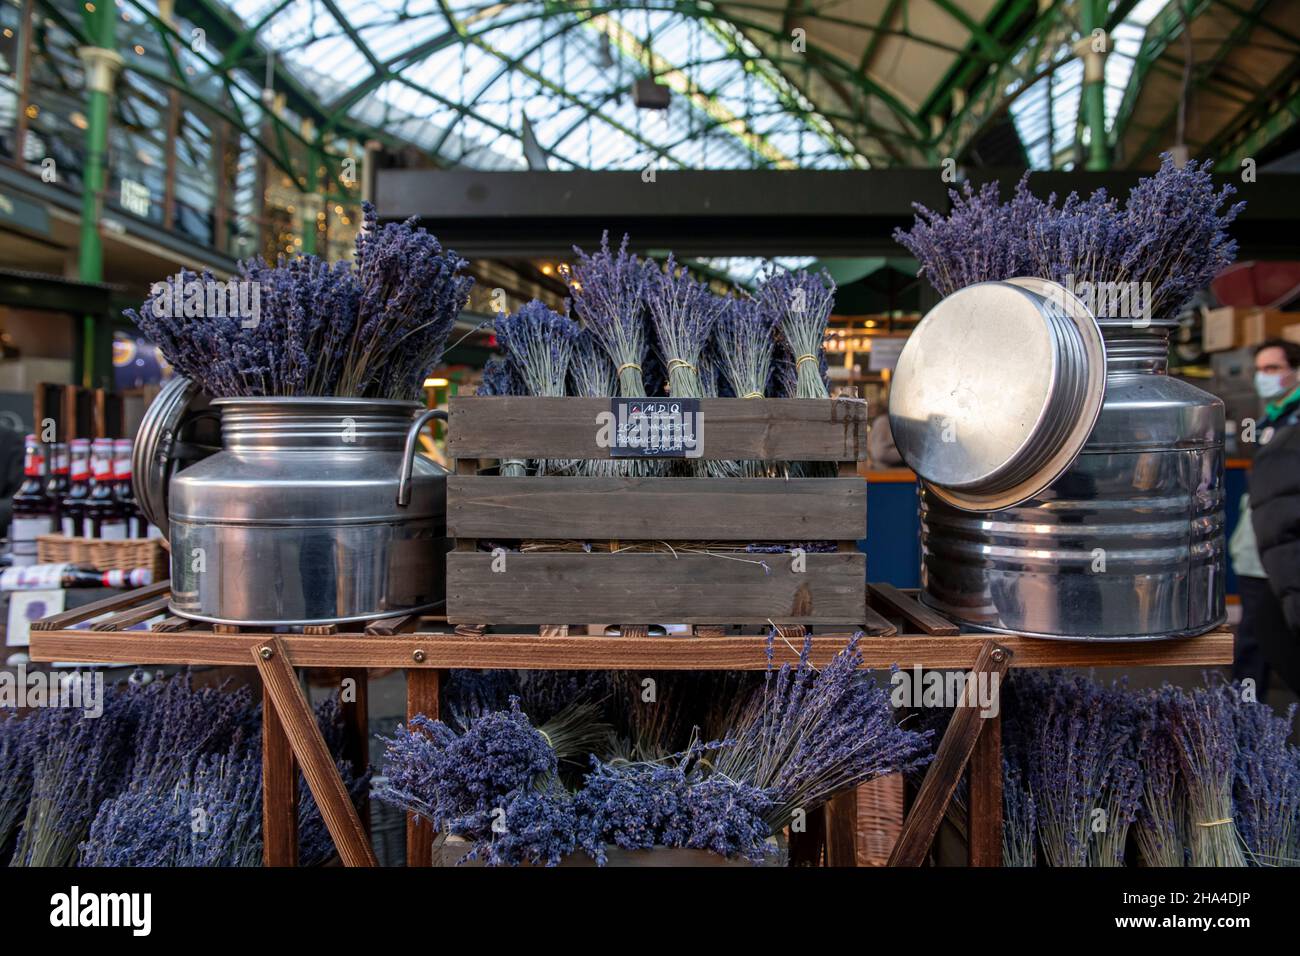 A stall selling dried lavender bunched at Borough Market in December 2021 Stock Photo